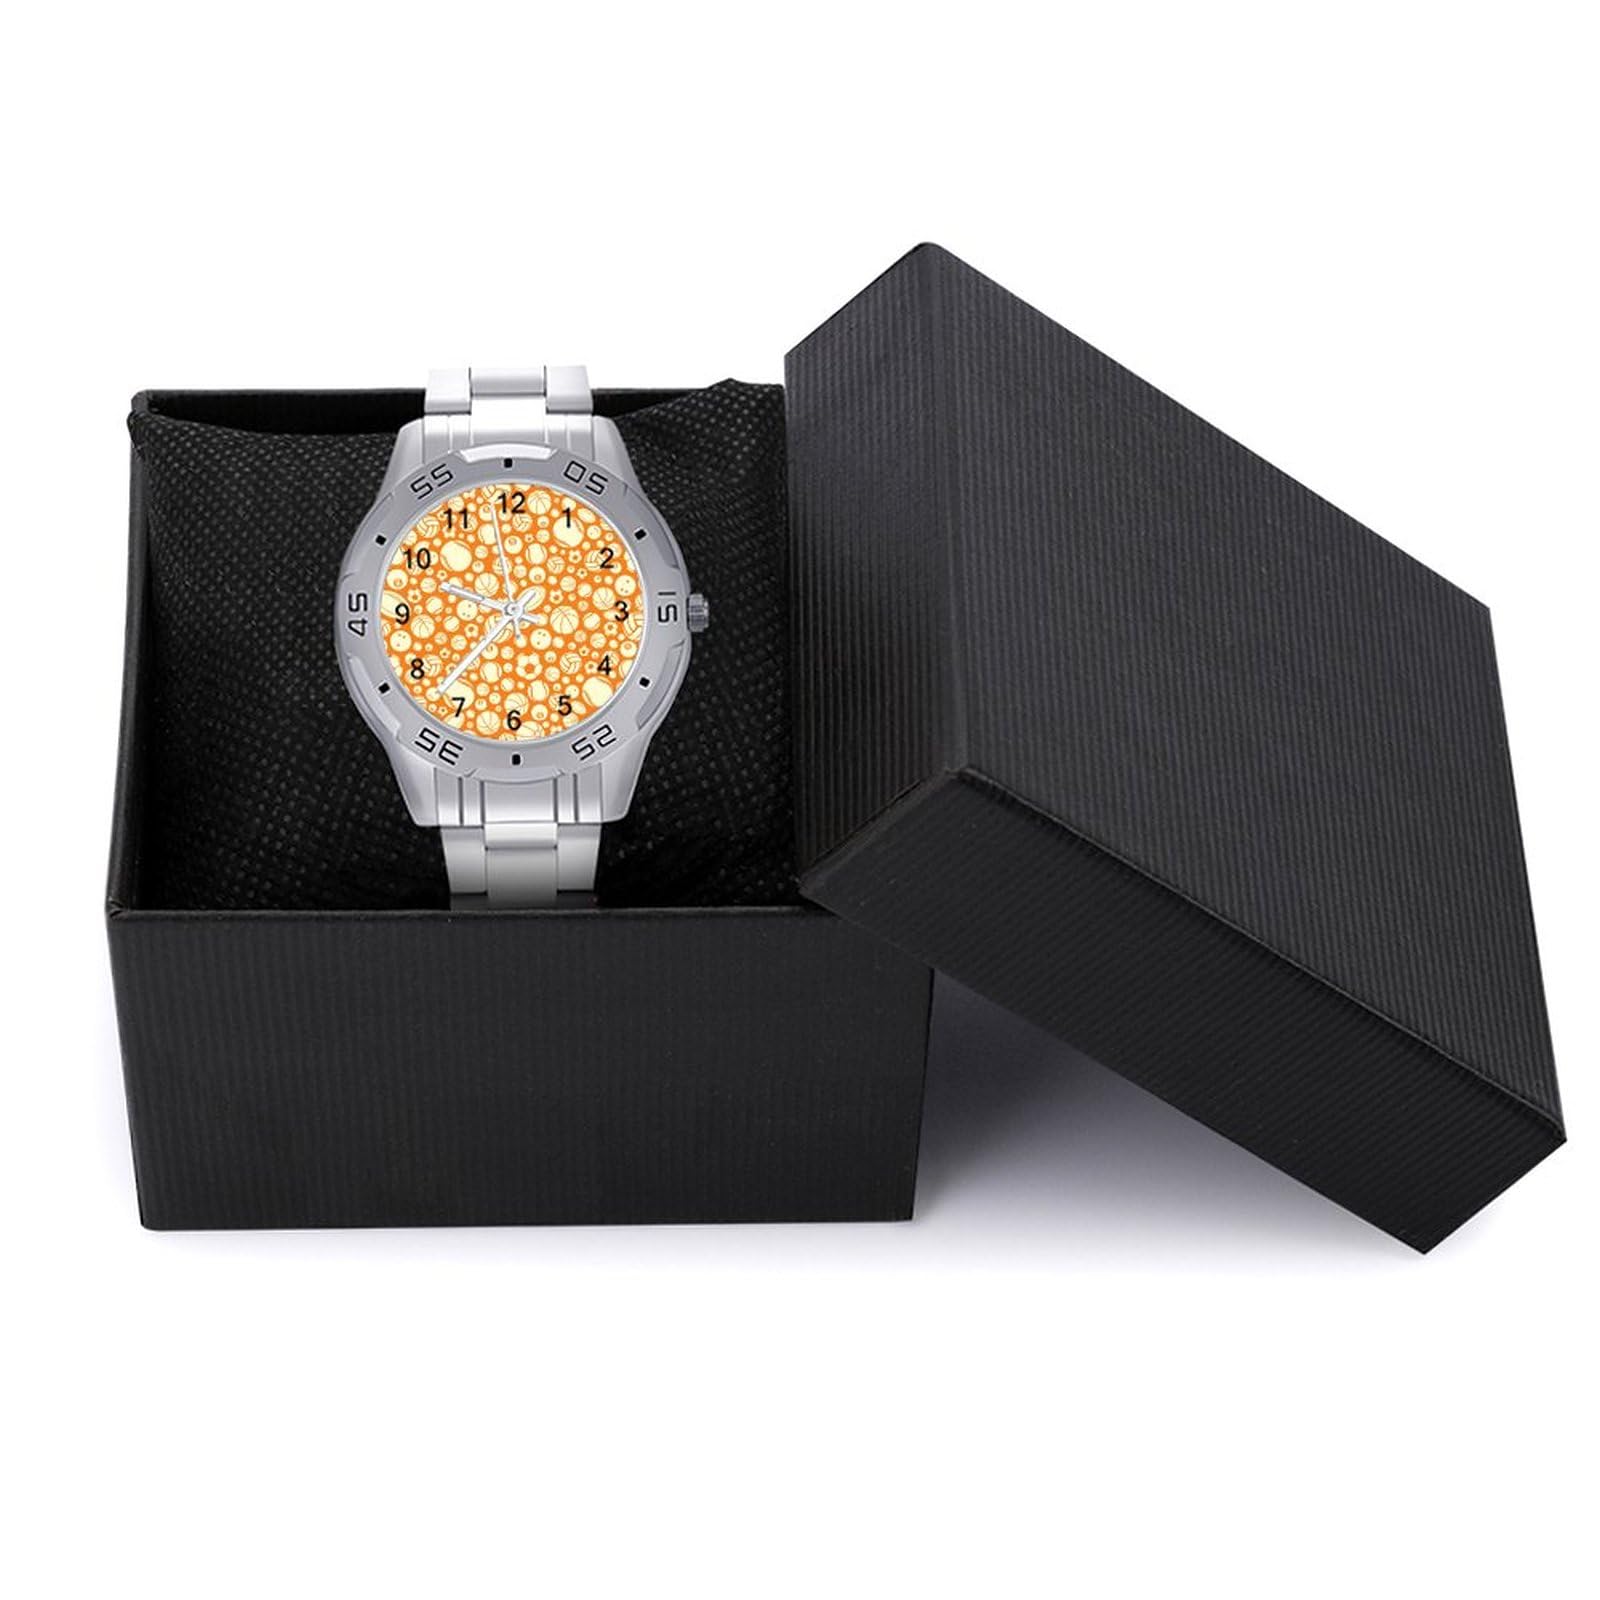 Balls Pattern Stainless Steel Band Business Watch Dress Wrist Unique Luxury Work Casual Waterproof Watches